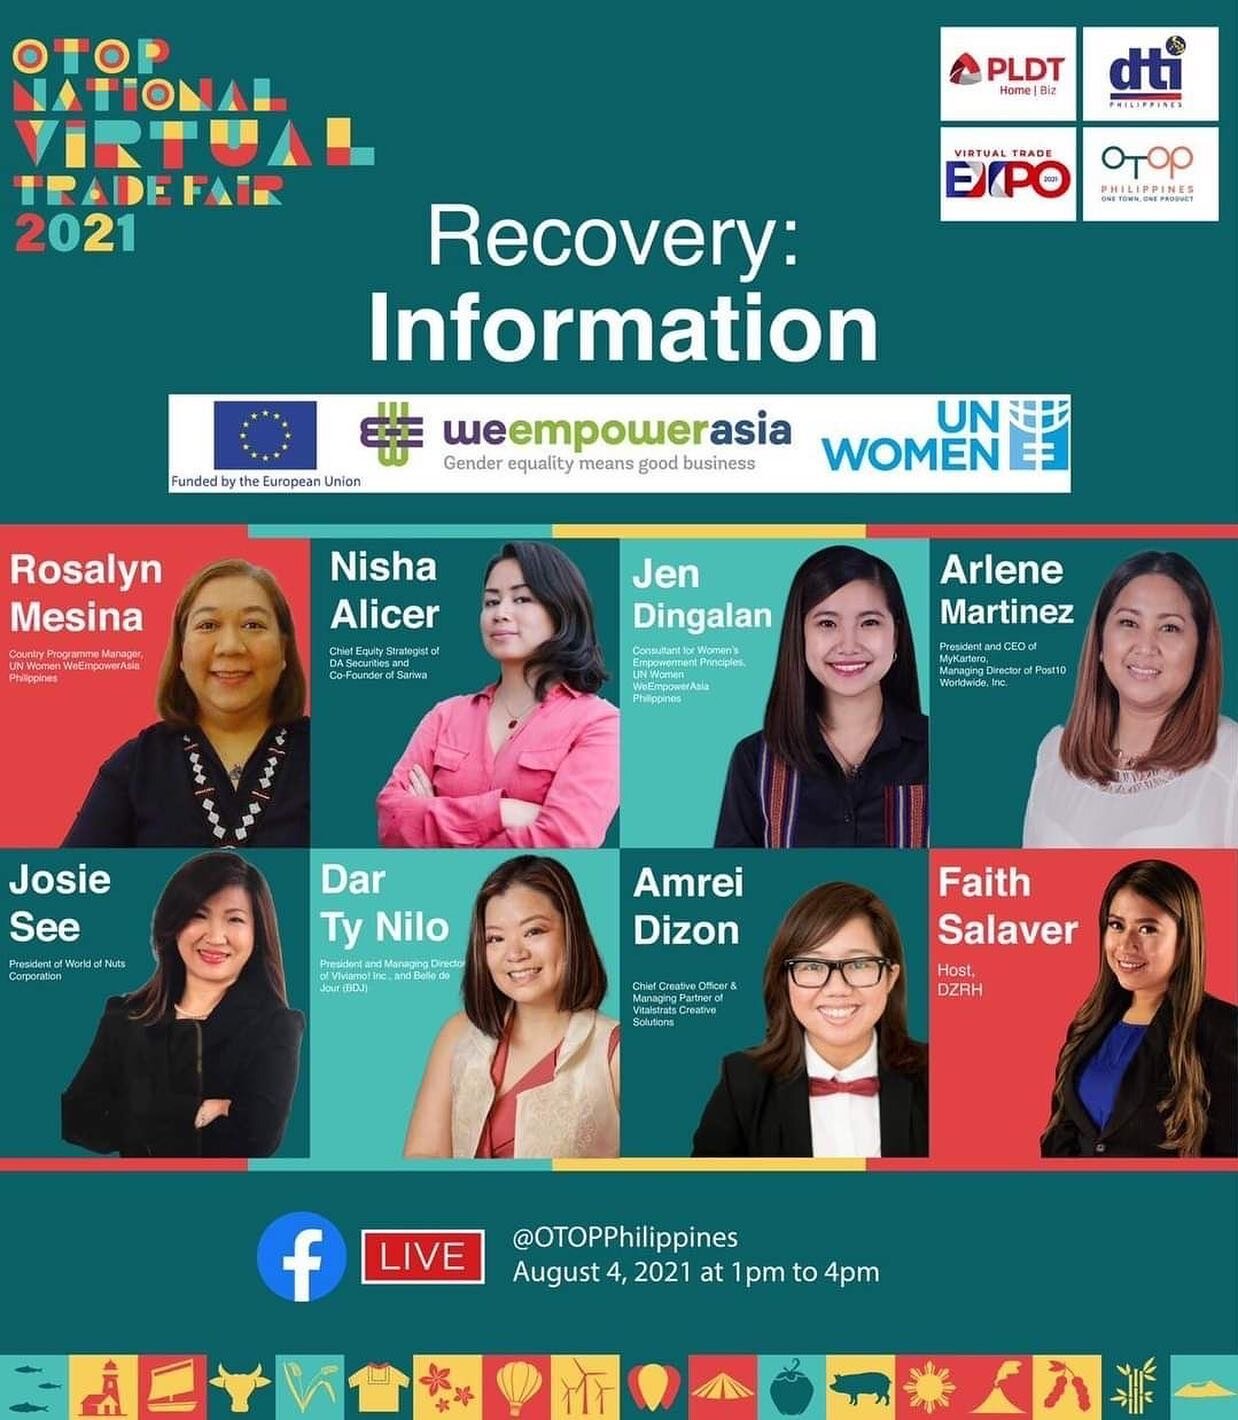 Get to know more information on our road to recovery through this pandemic!

During the third day of the OTOP National Virtual Trade Fair 2021, know the business trends to watch out for and join our panel discussion on Women Entrepreneur Resiliency f